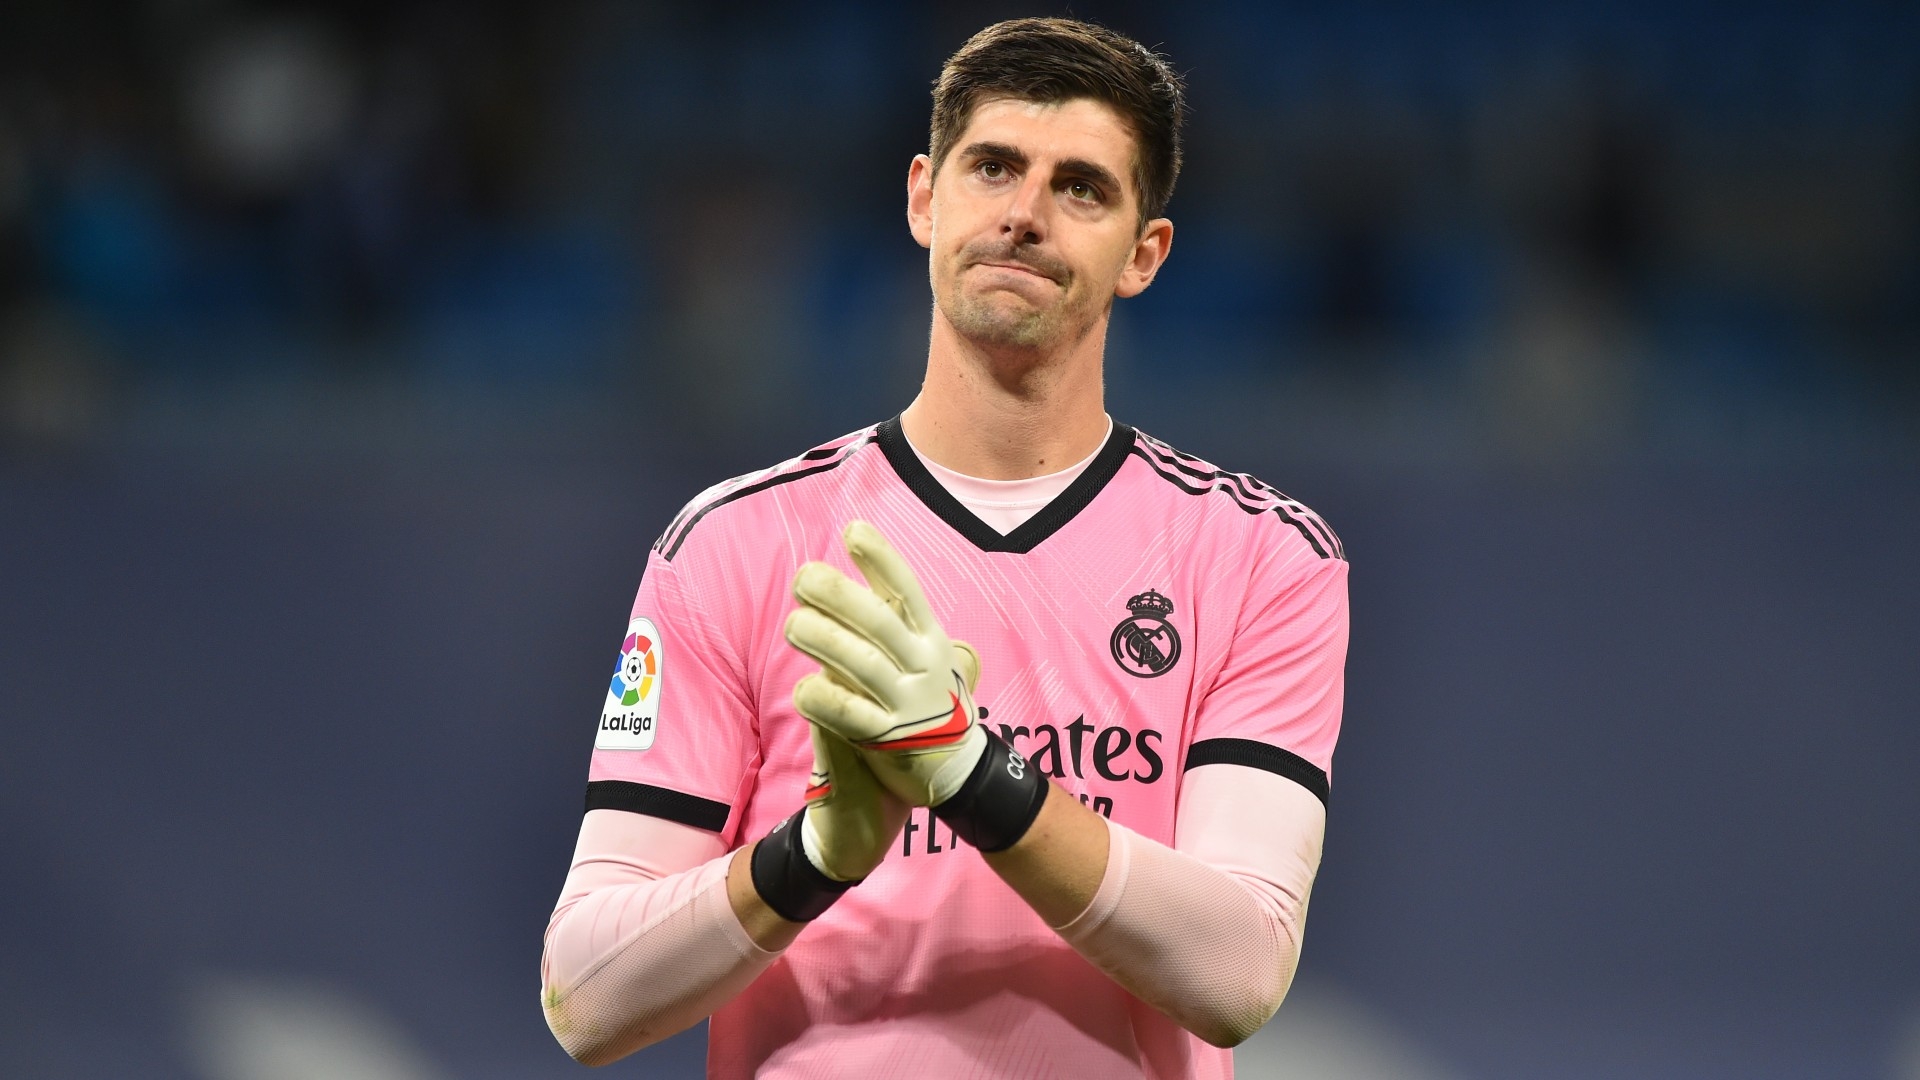 Thibout Courtois 2022 Wallpapers - Wallpaper Cave